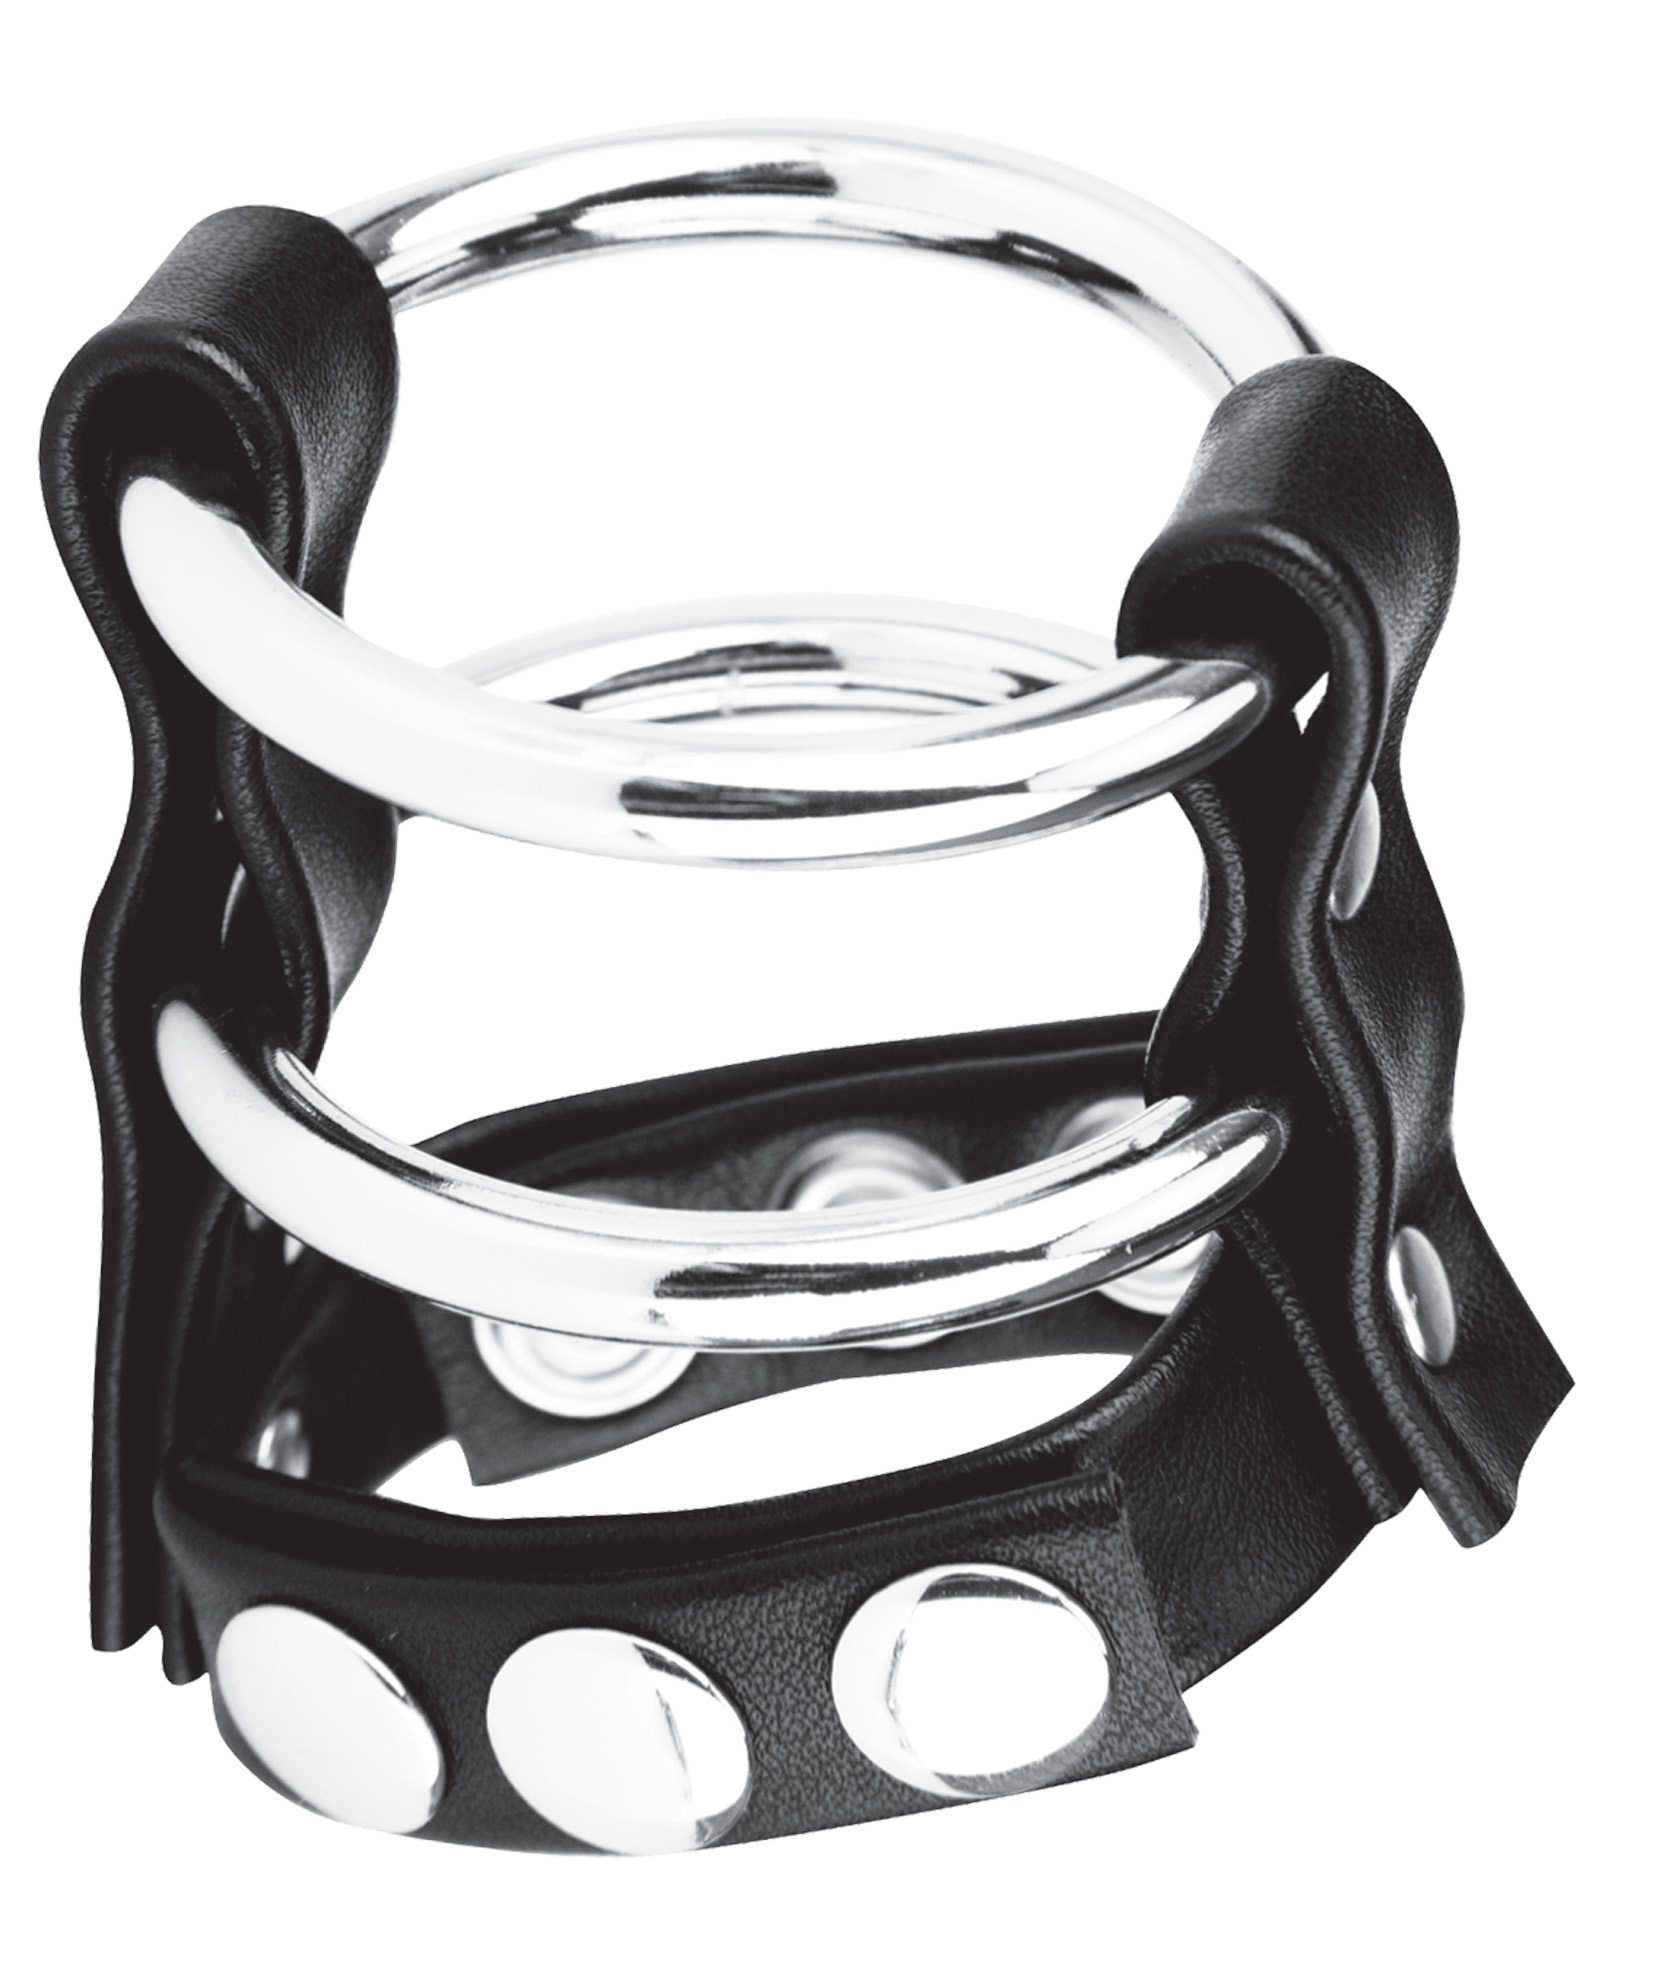 BLUE LINE C&B GEAR Double Metal Cock Ring With Adjust. Snap Ball Strap